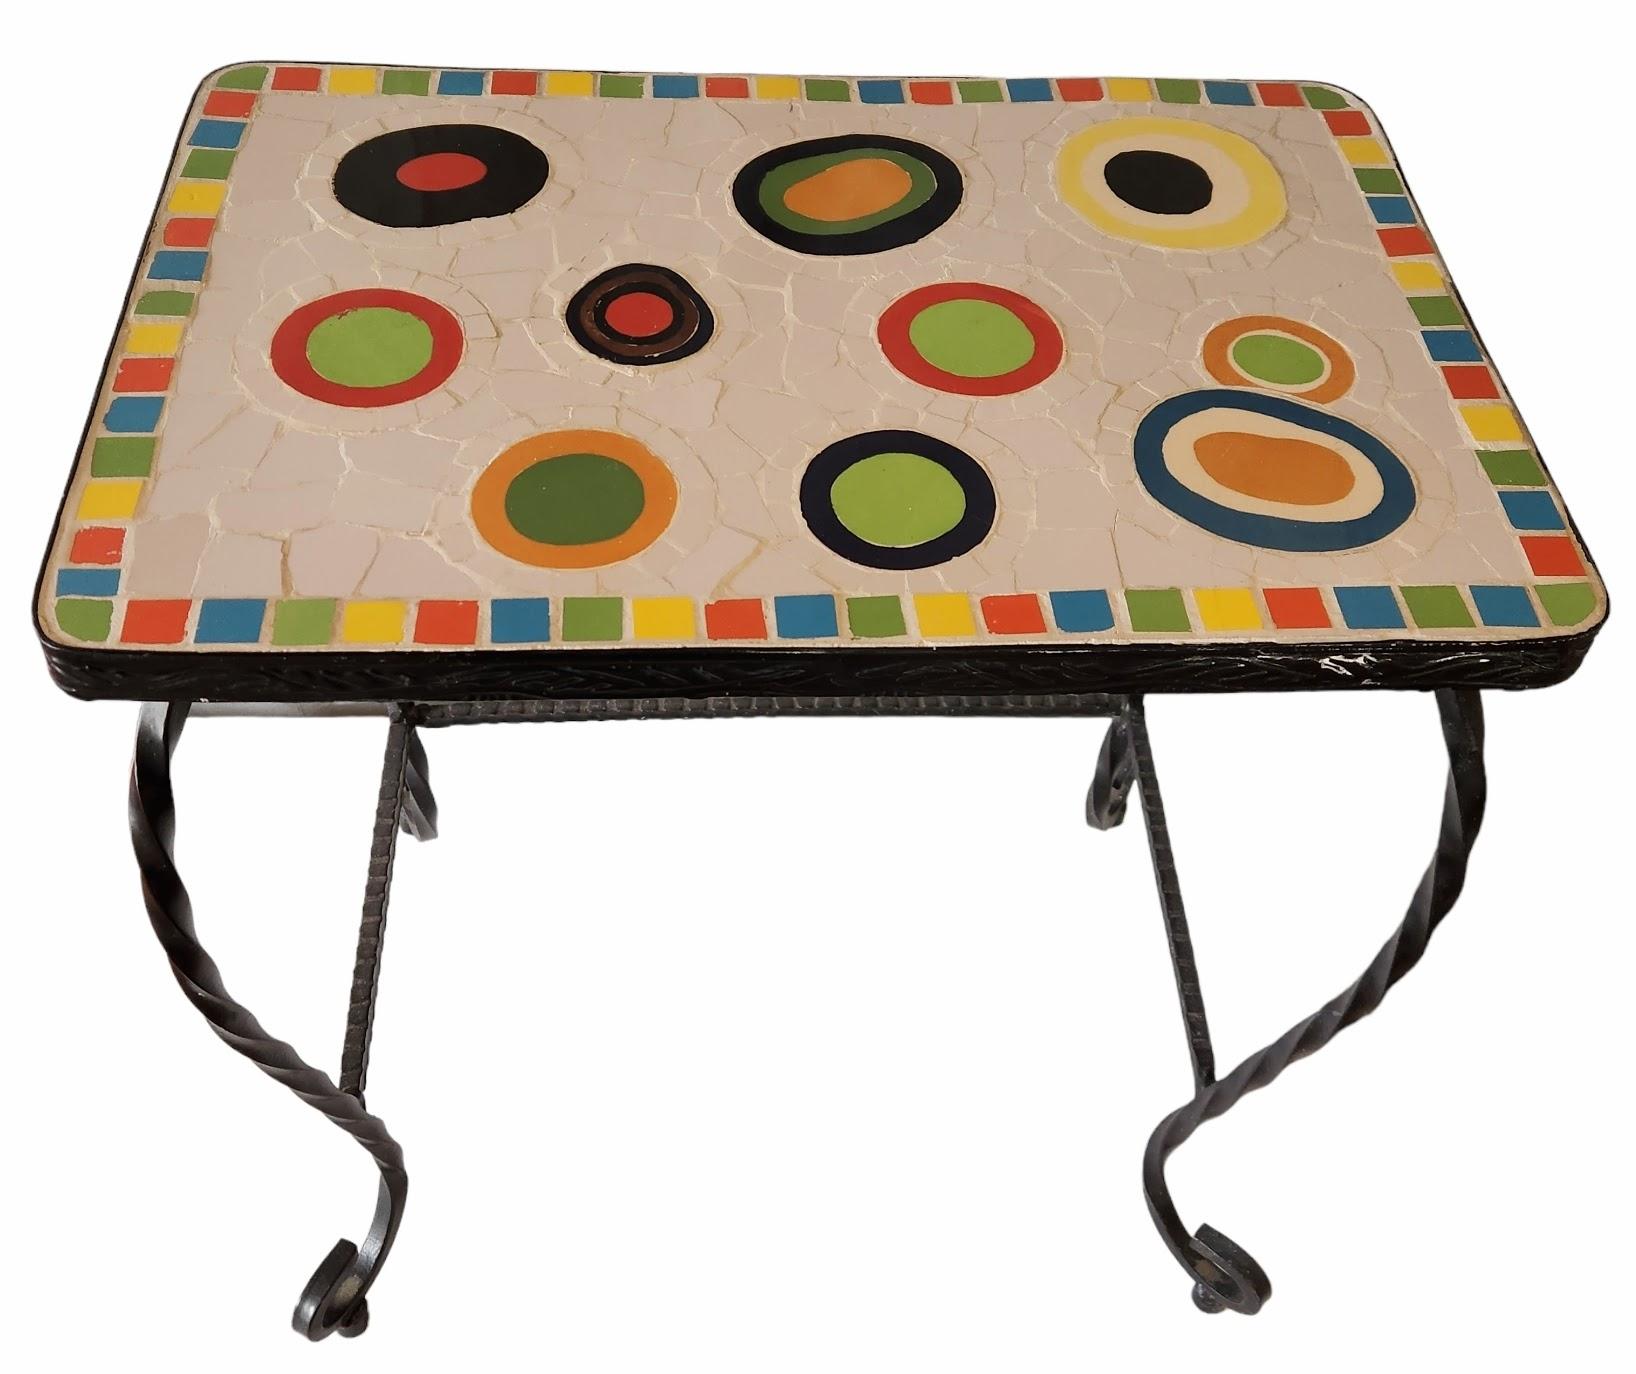 Pair of Twisted Wrought Iron Ceramic Mosaic Side Tables, Italy, 1960 For Sale 2